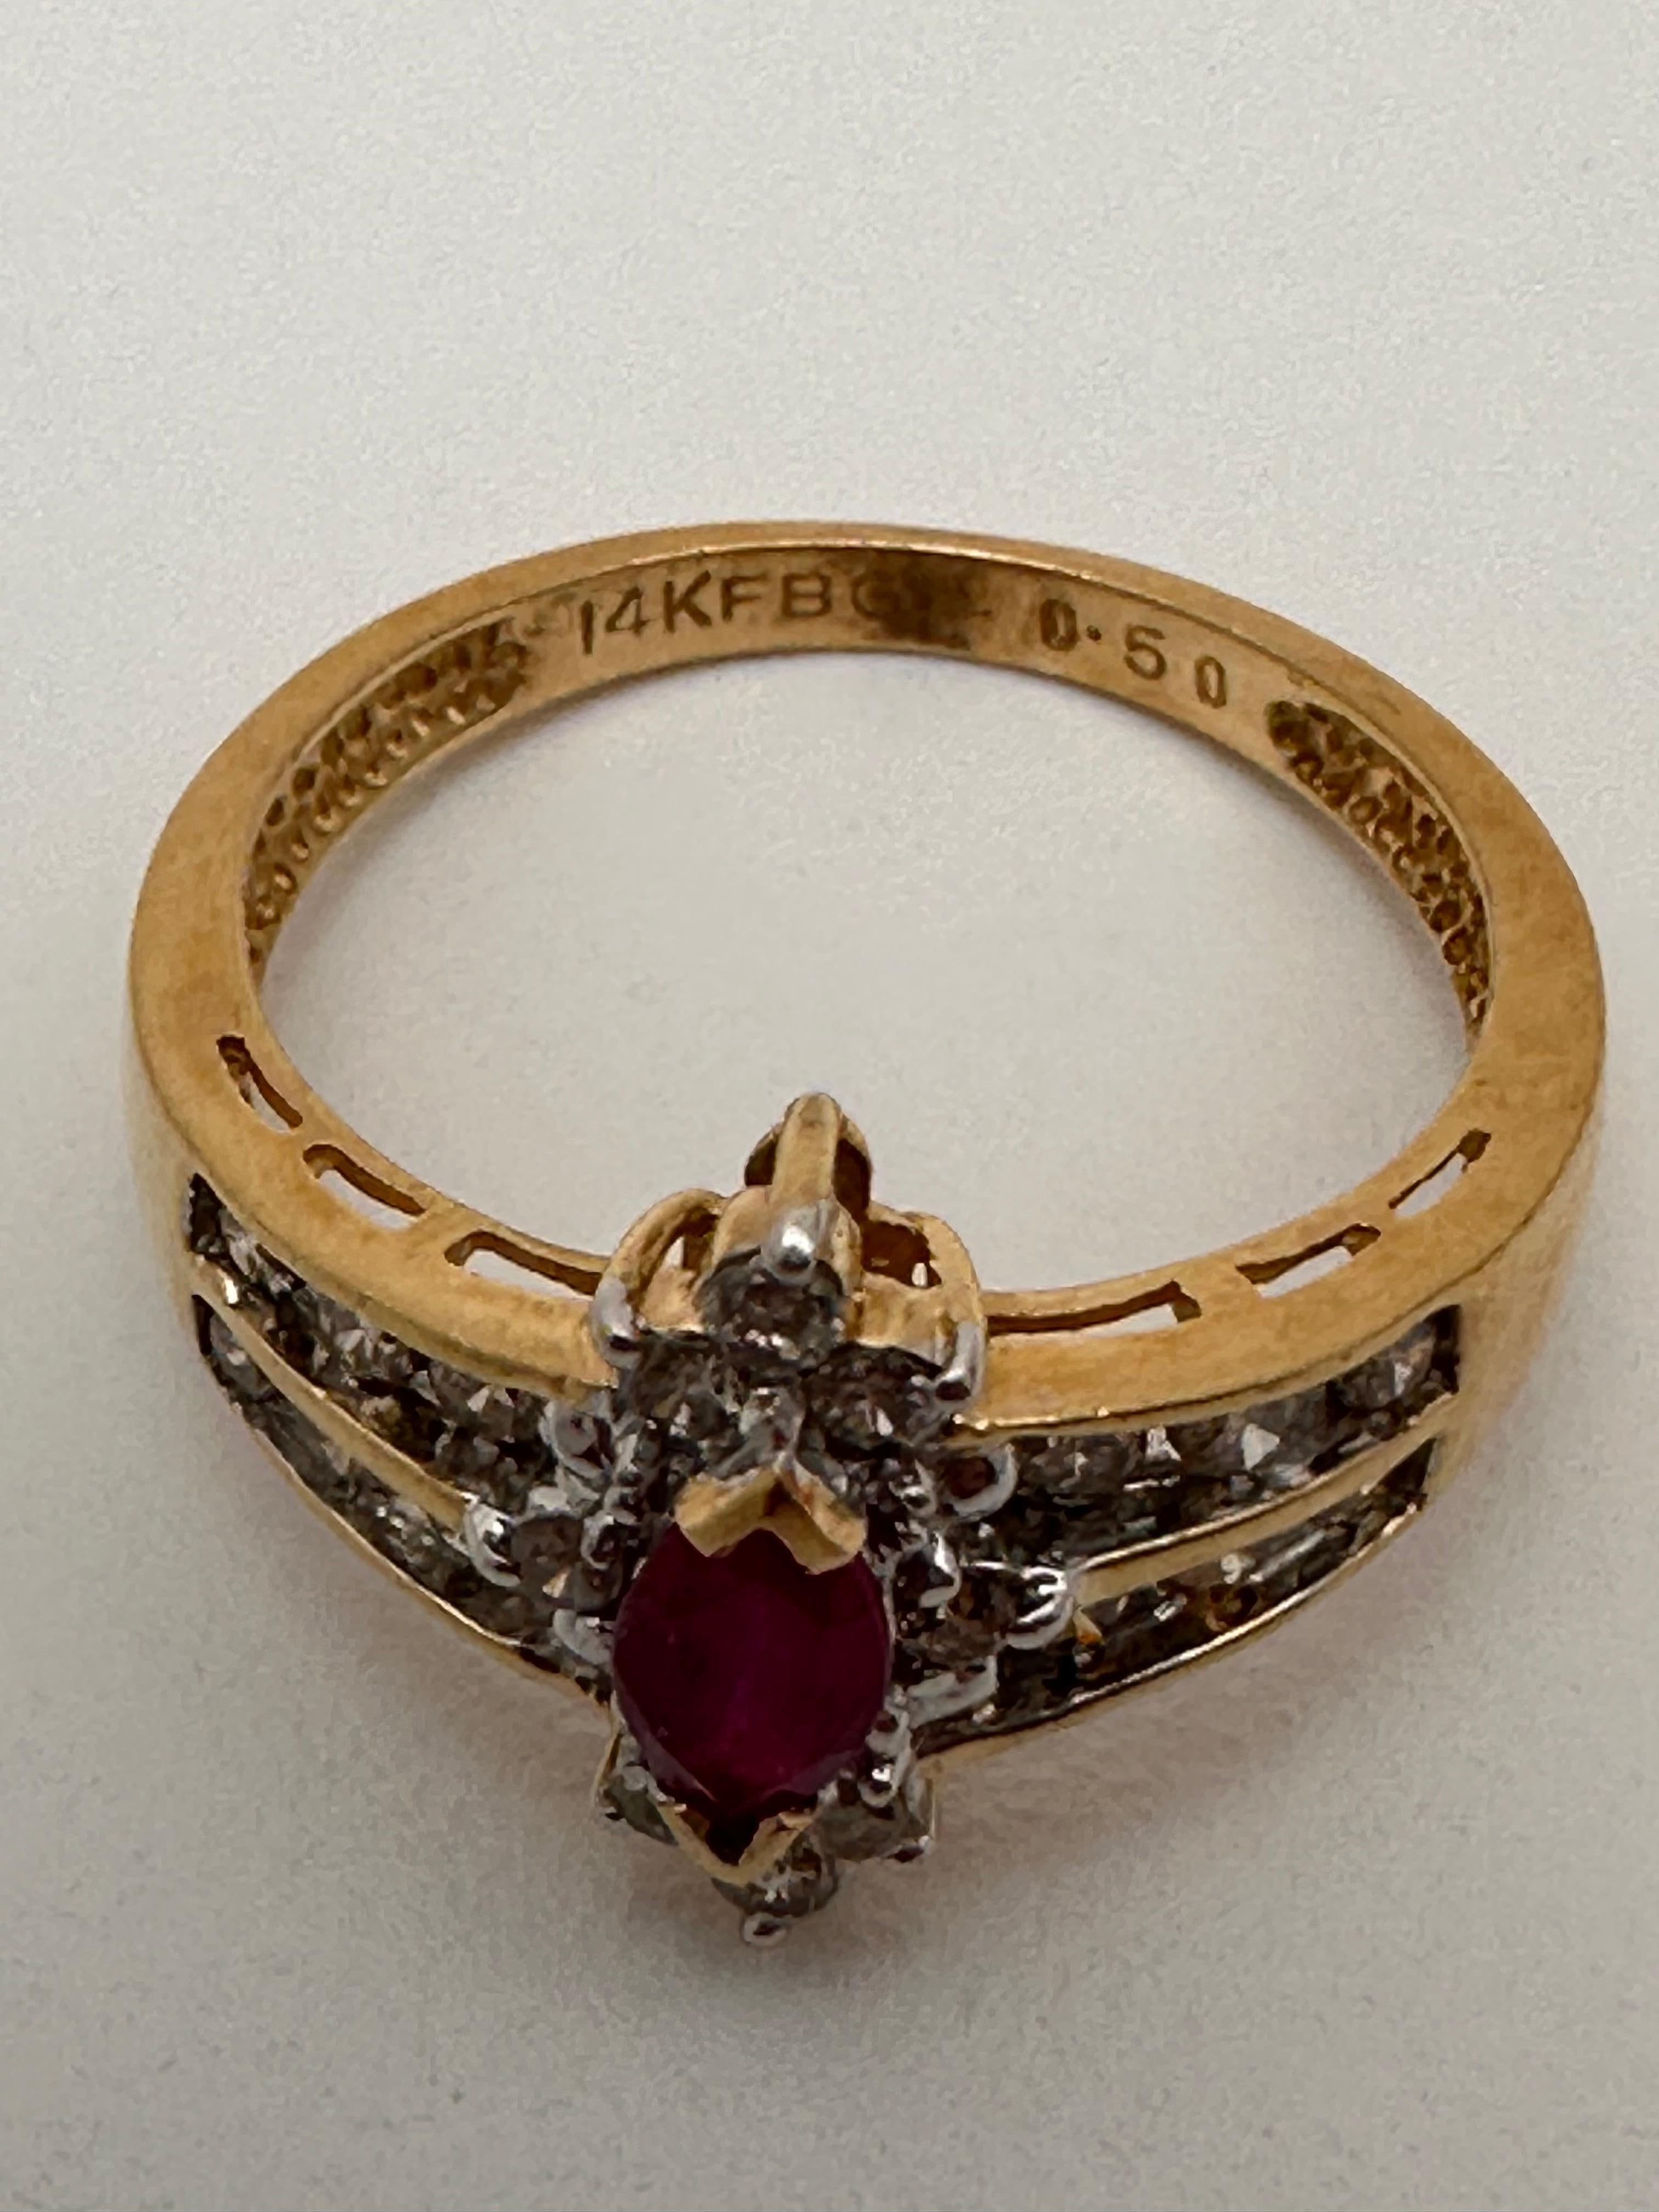 14k Yellow Gold 4mm x 6mm Marquise Ruby .50c Diamond Ring Size 7 1/2 For Sale 3